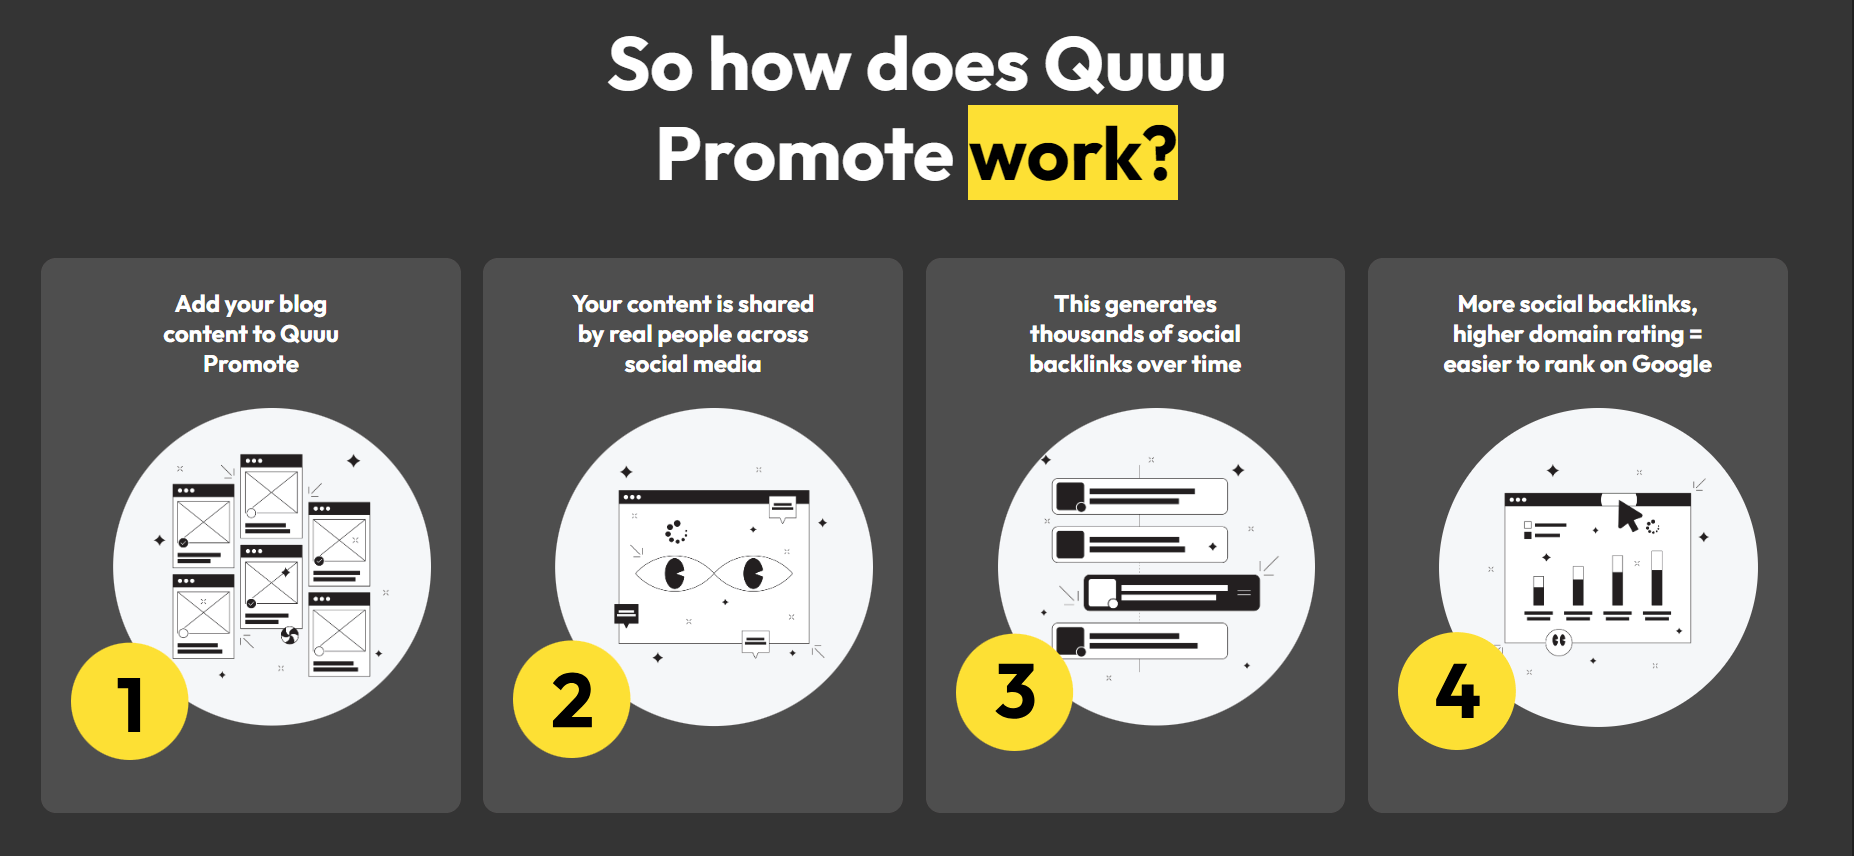 how does quuu promote work